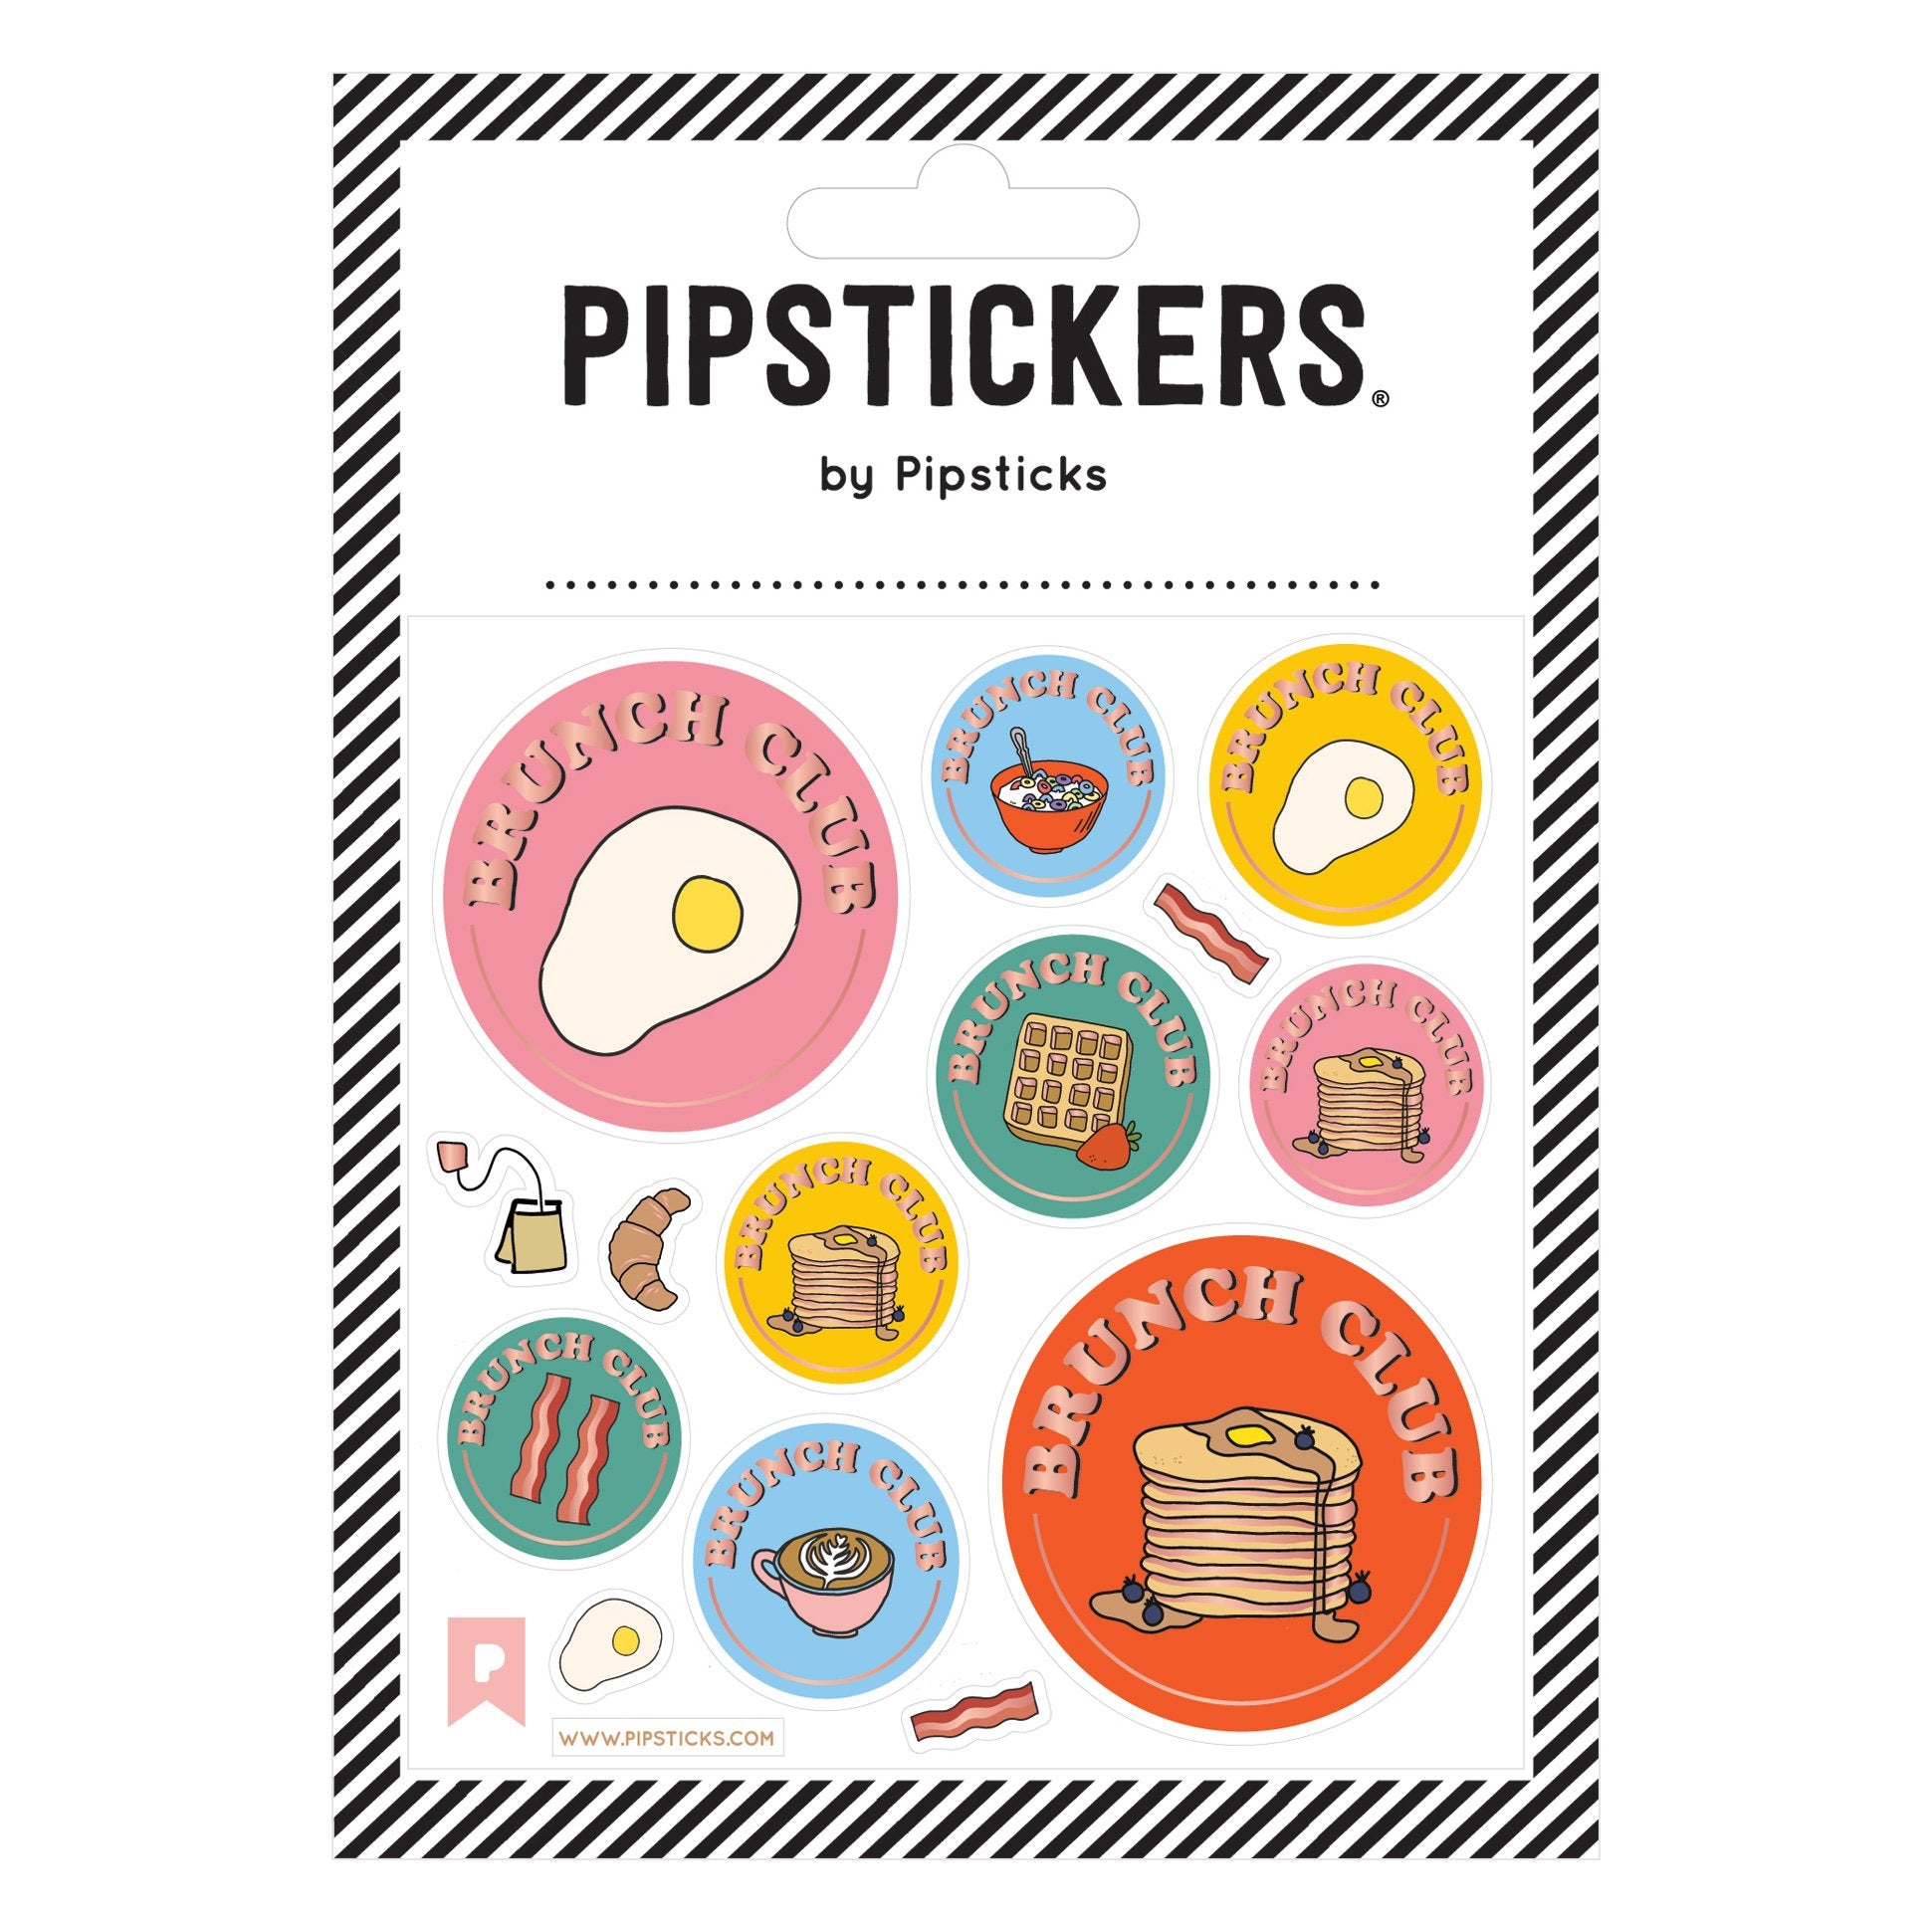 Hands Off My Stickers! Sticker Collection Book